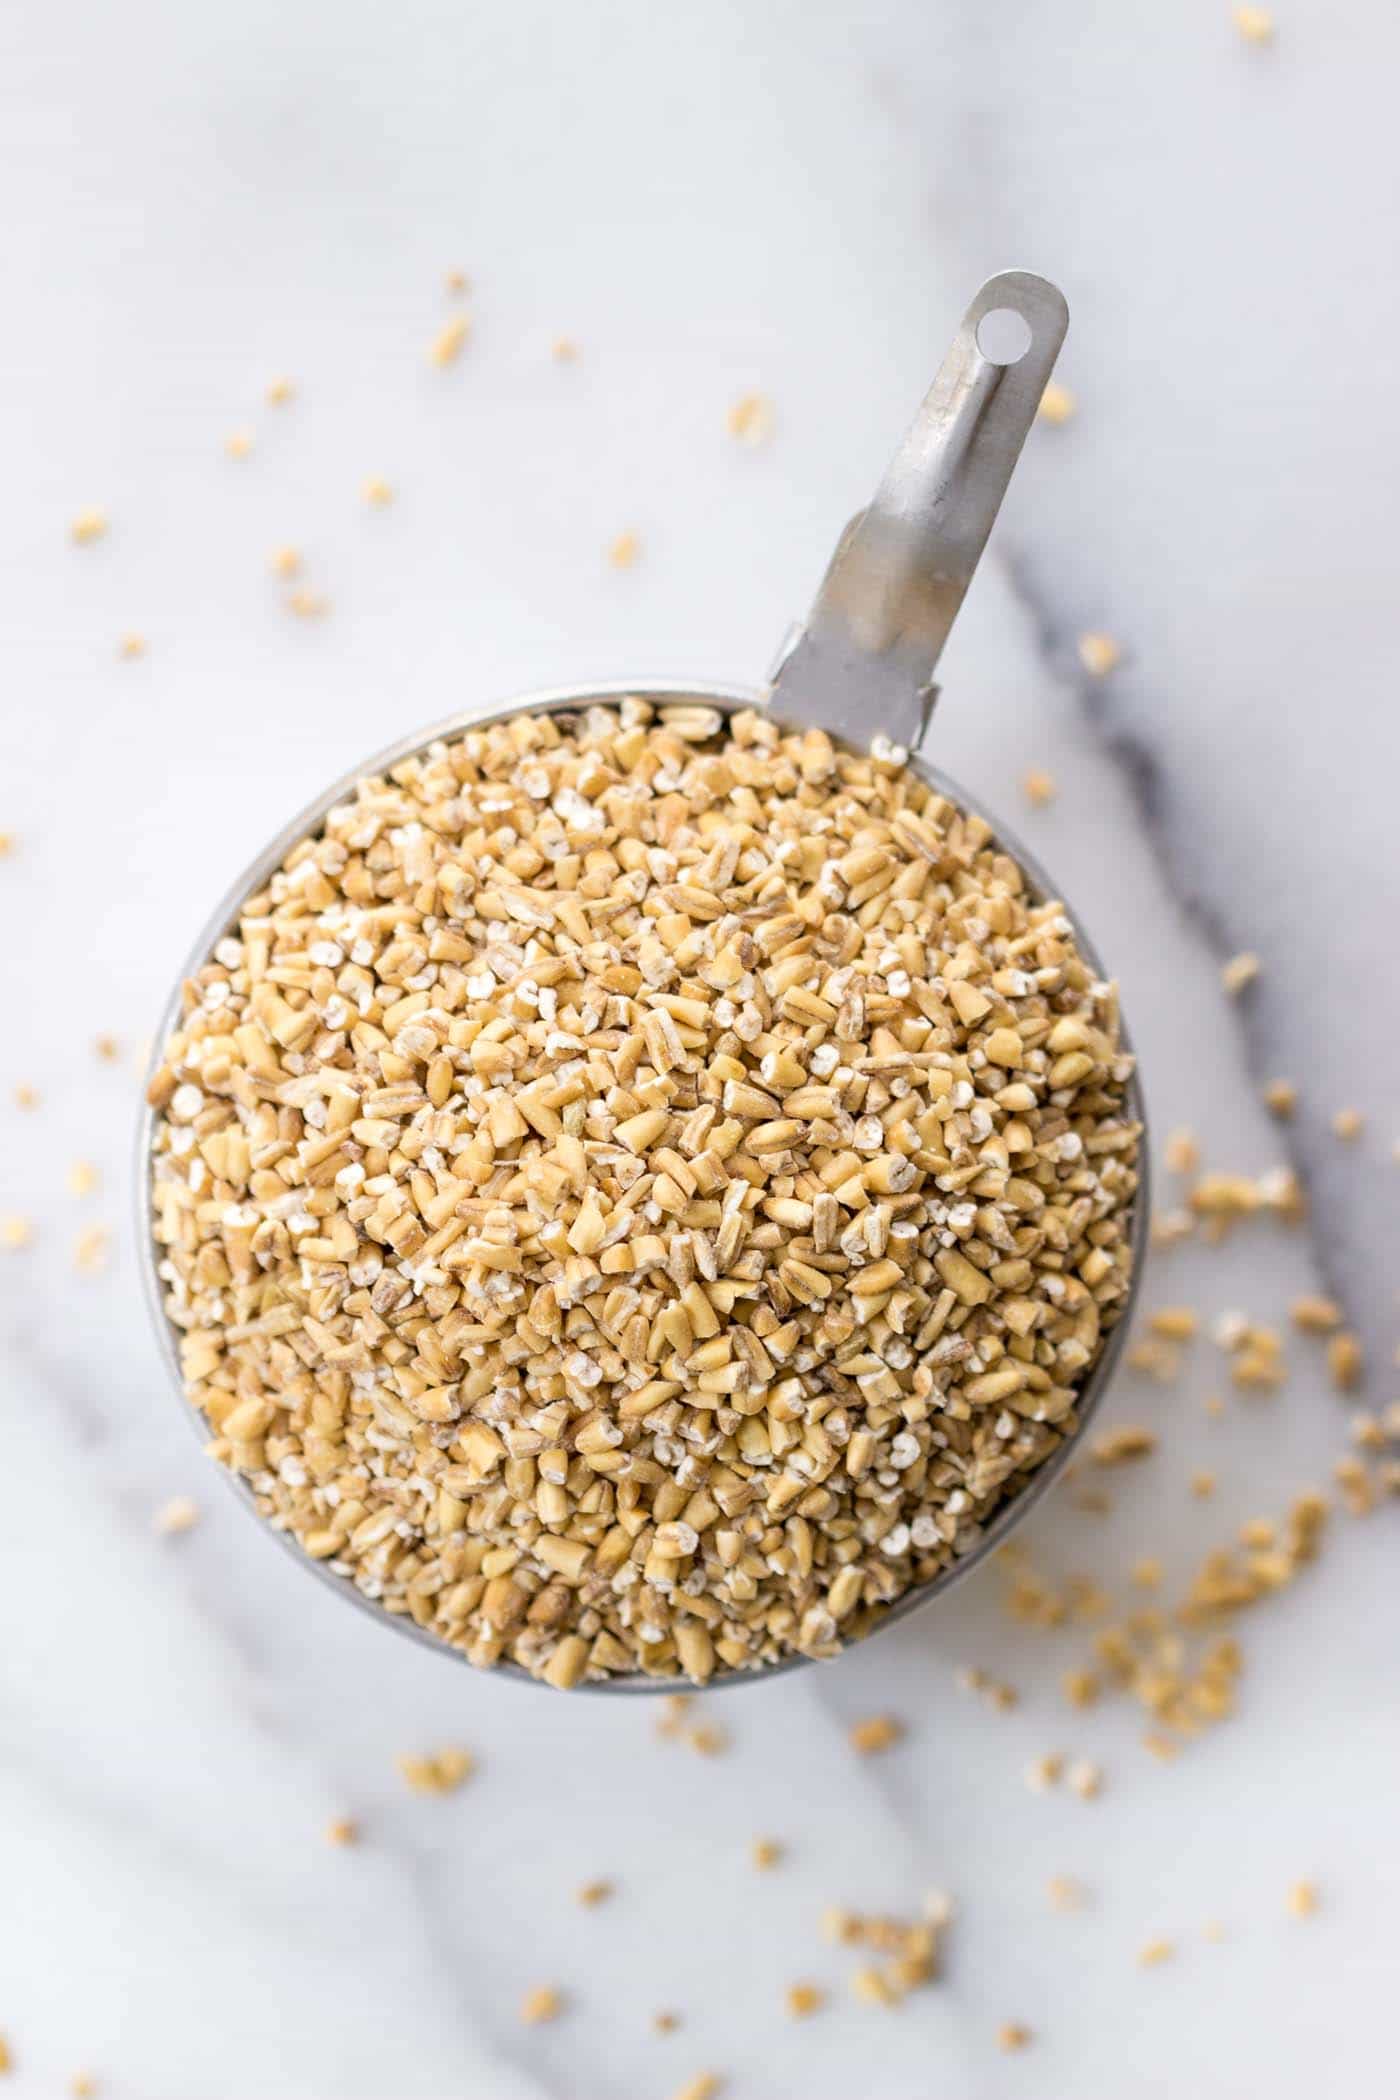 STEEL CUT OATS: one of the six staple whole grains you should have you in your pantry!